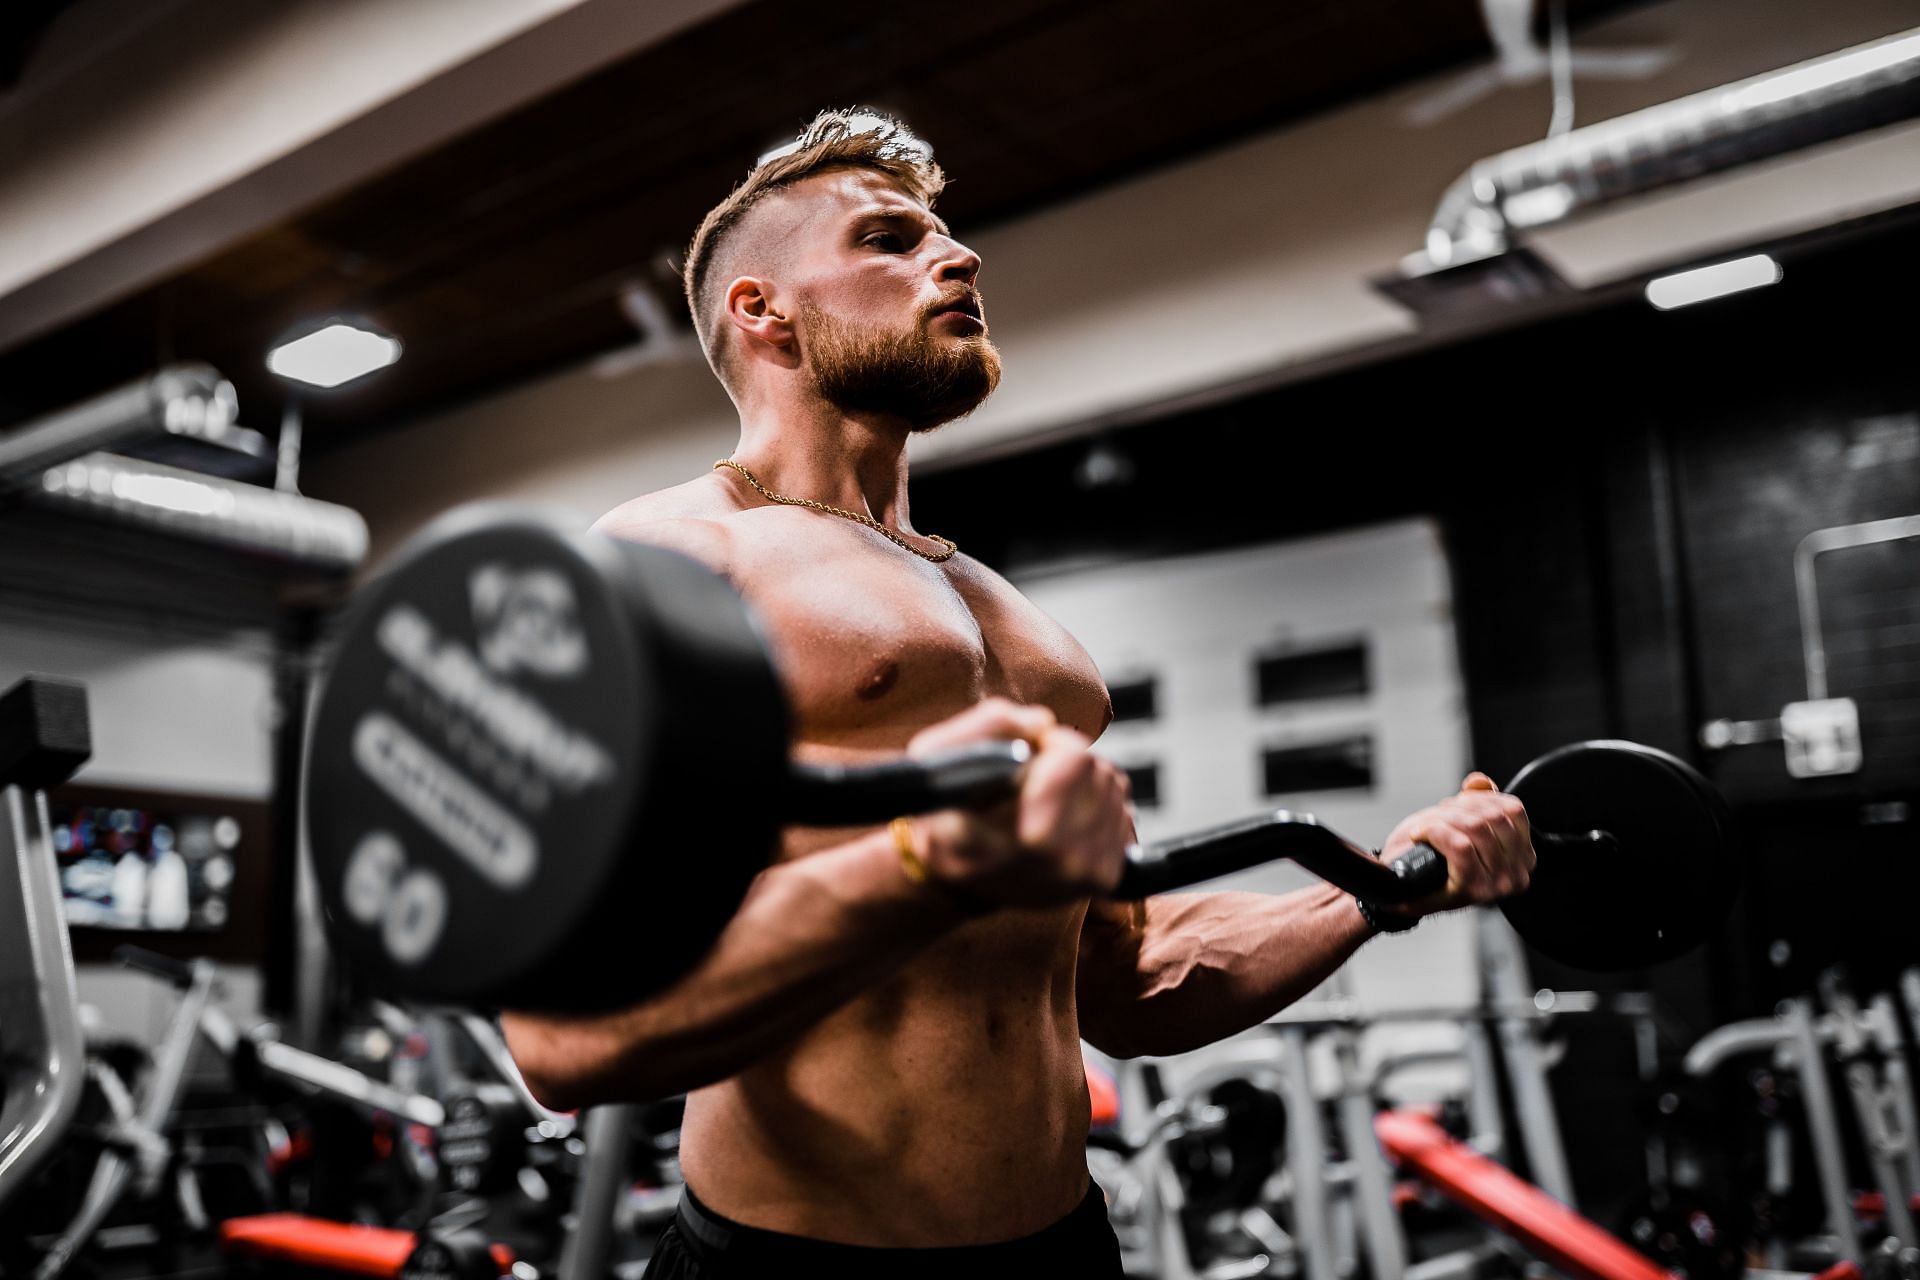 Chest muscles are the distinguishing aspect of muscle mass (Image via Unsplash/Anastase Maragos)